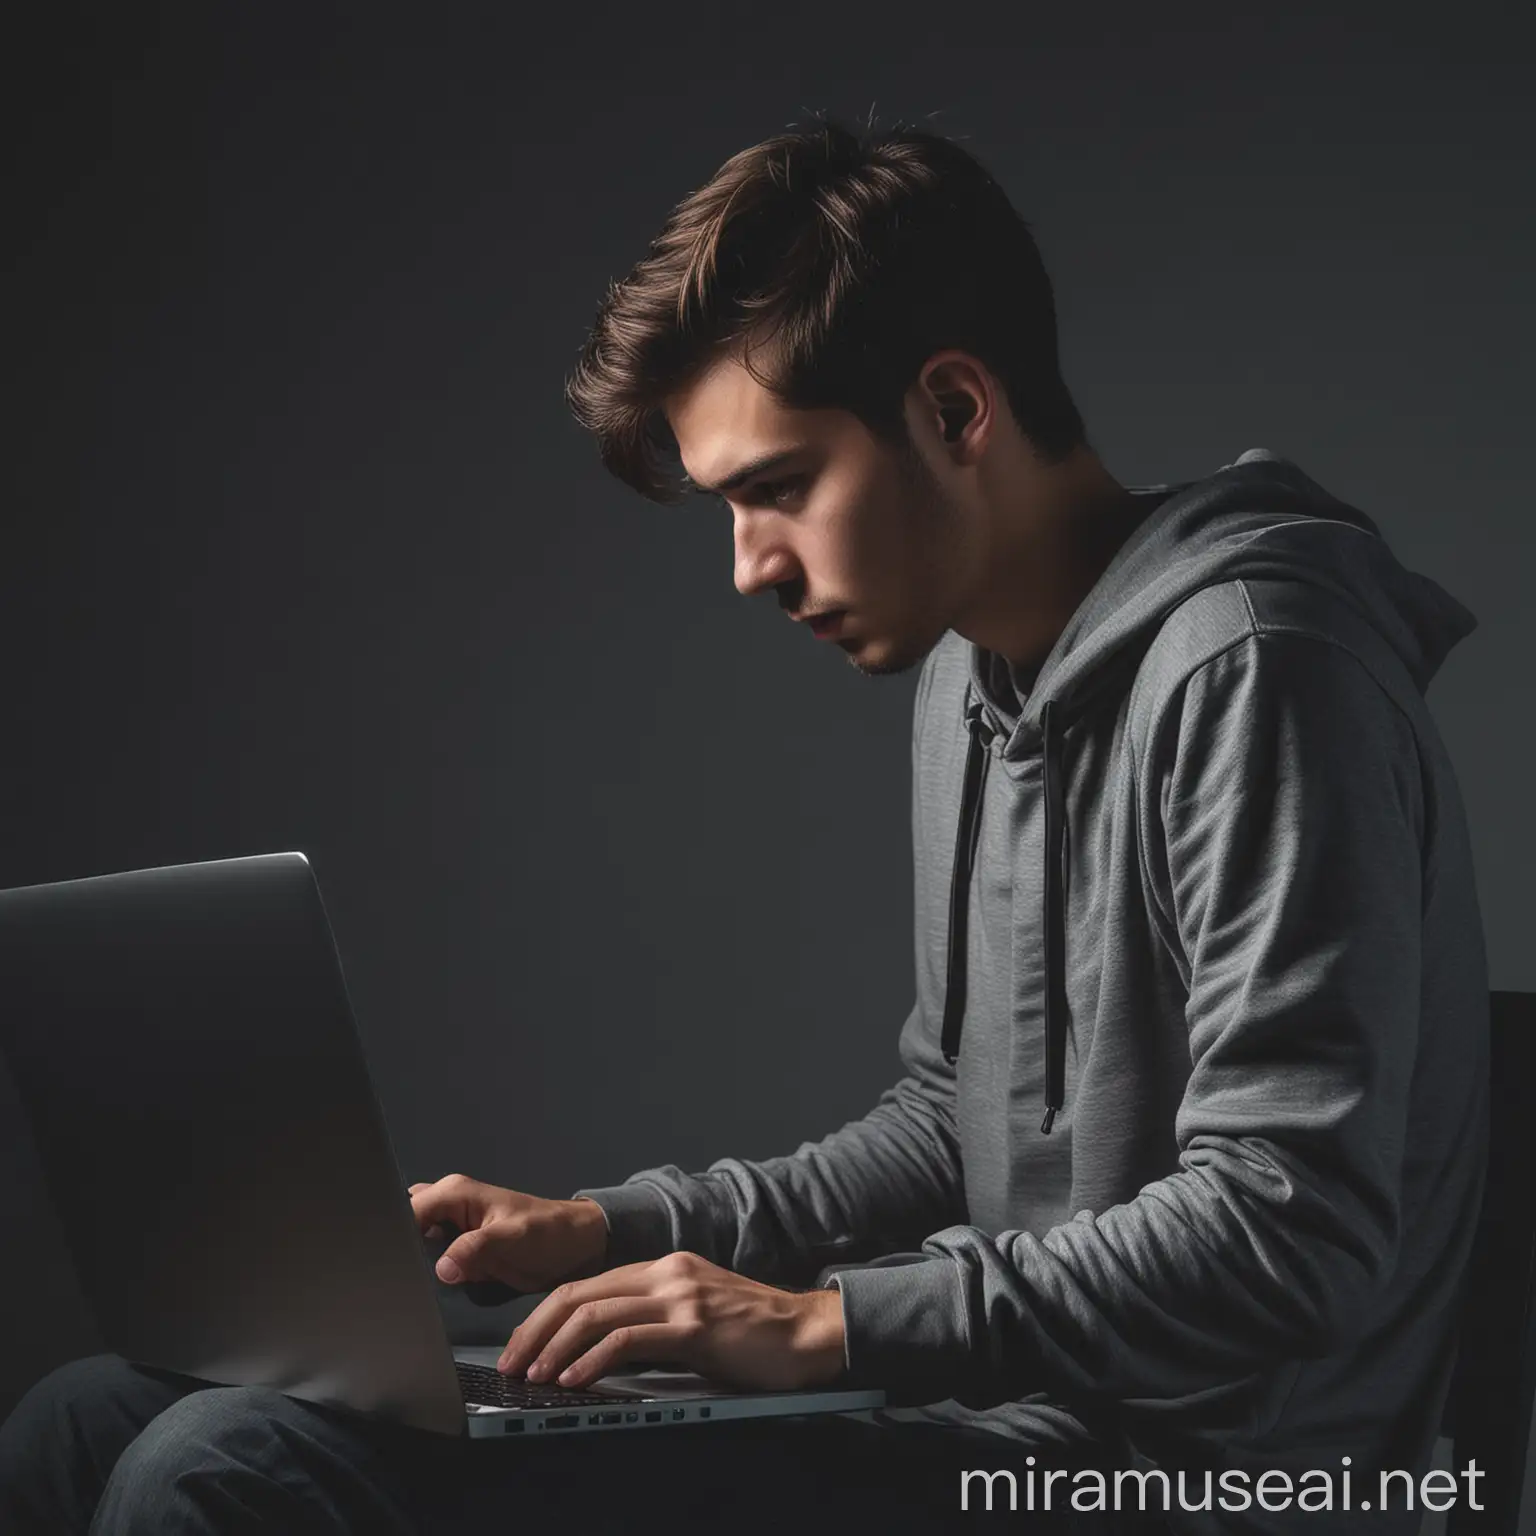 Young Software Developer Working Late in Dimly Lit Room